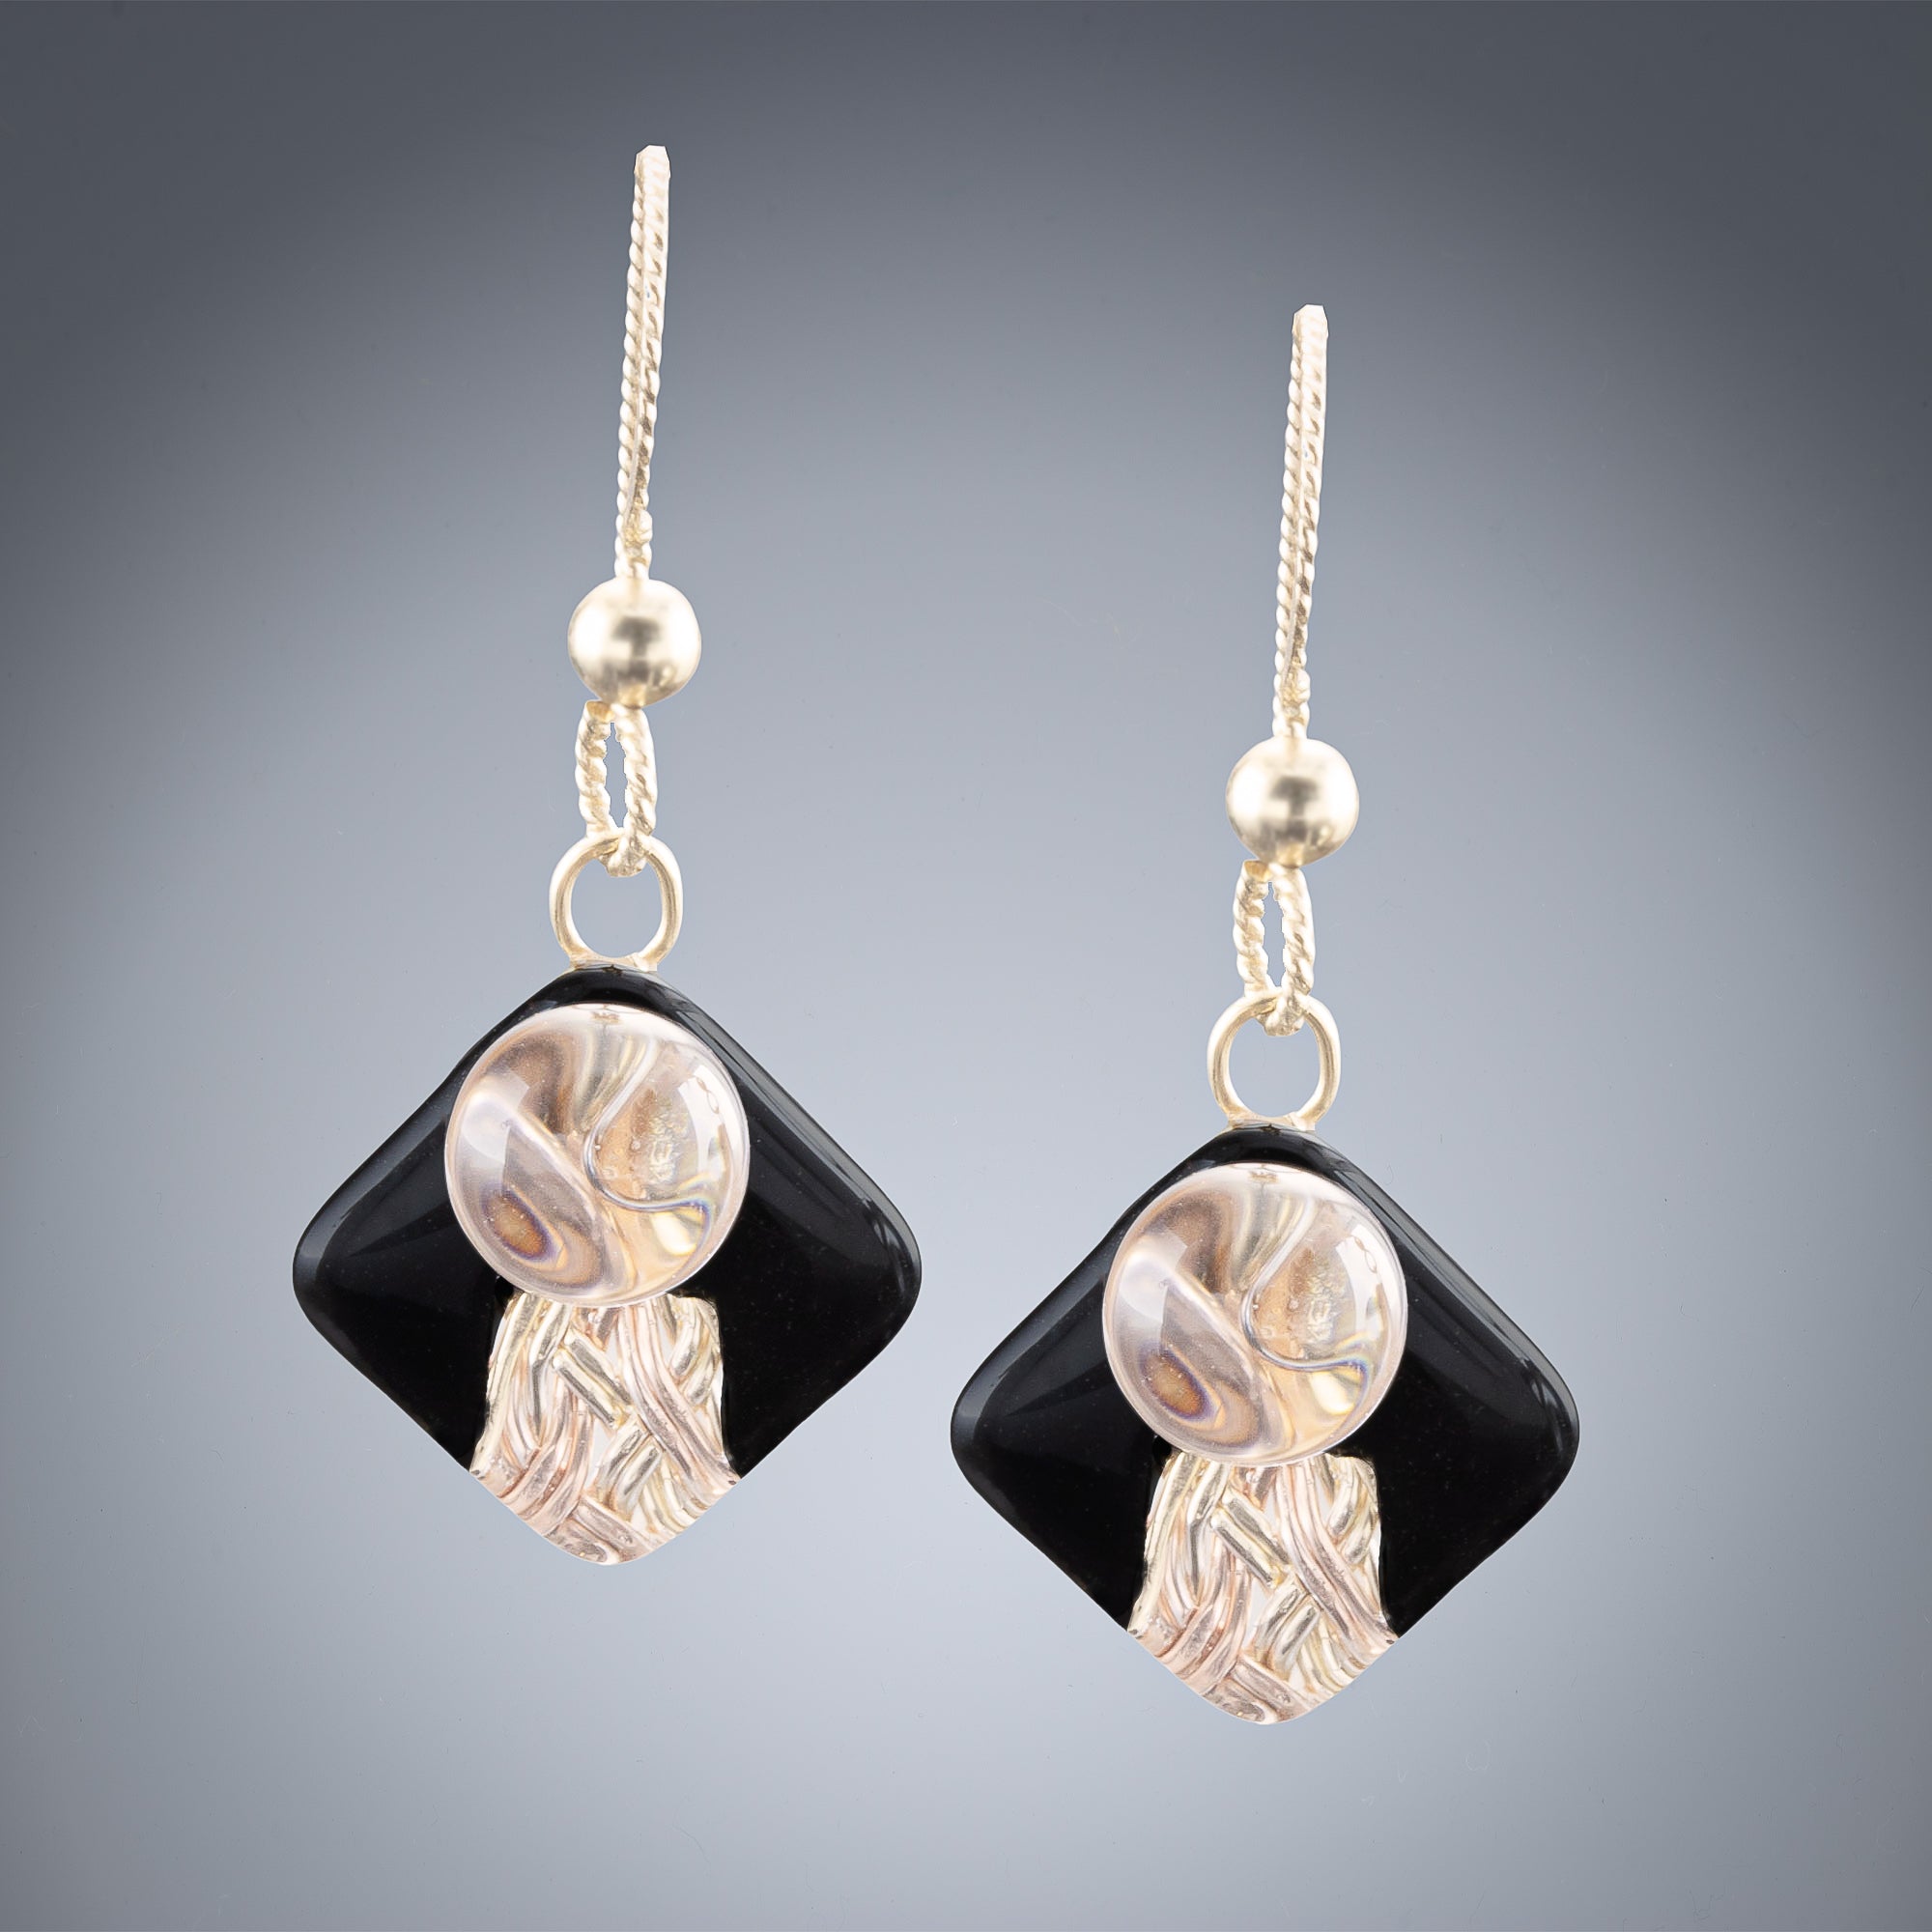 Handwoven Black and Gold Art Deco Inspired Earrings in both 14K Yellow and Rose Gold Fill